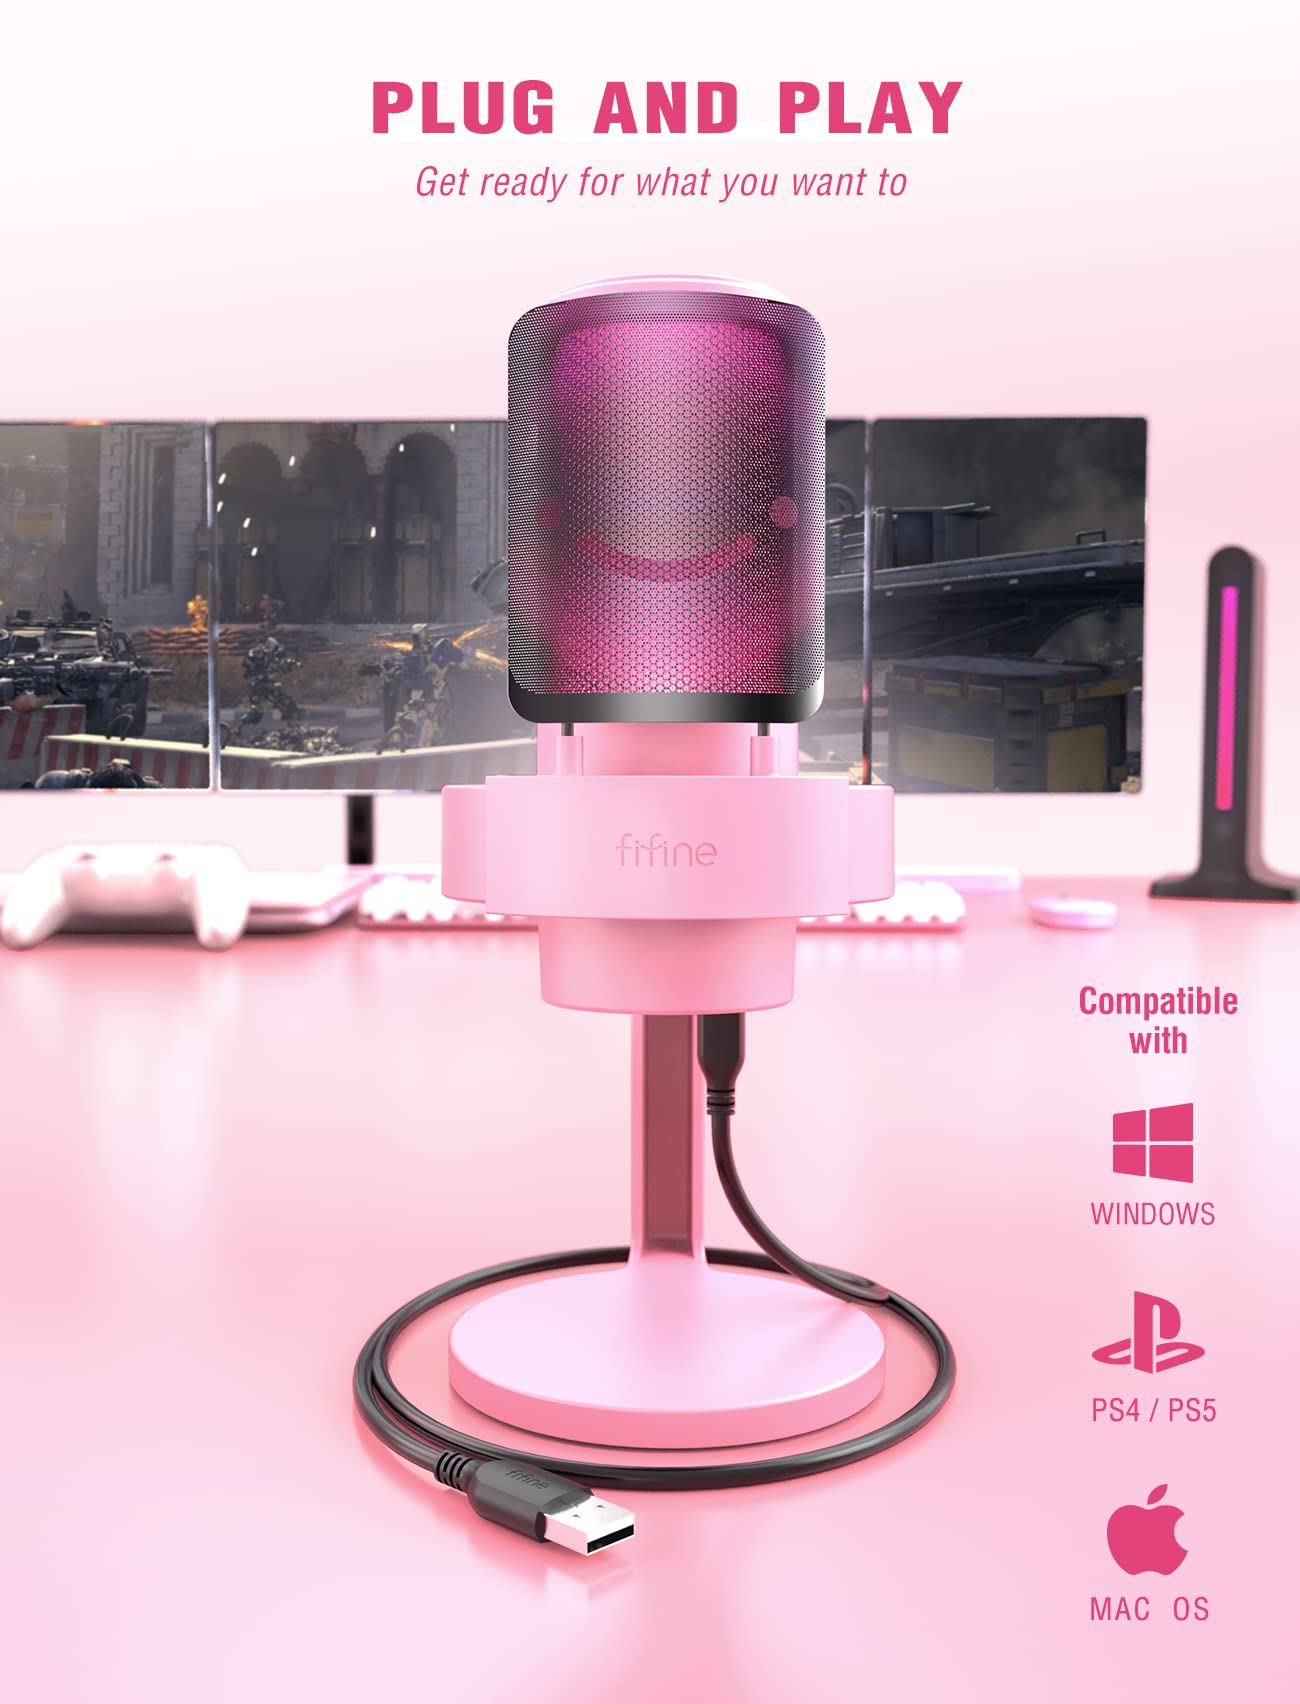 FIFINE USB Streaming Gaming Microphone, PC Condenser Desktop Mic for Video, Home use, YouTube, with RGB Control, Gain Knob, 3.5mm Headphone Jack, Shock Mount, on Computer/PS4/PS5-AmpliGame A8 Pink